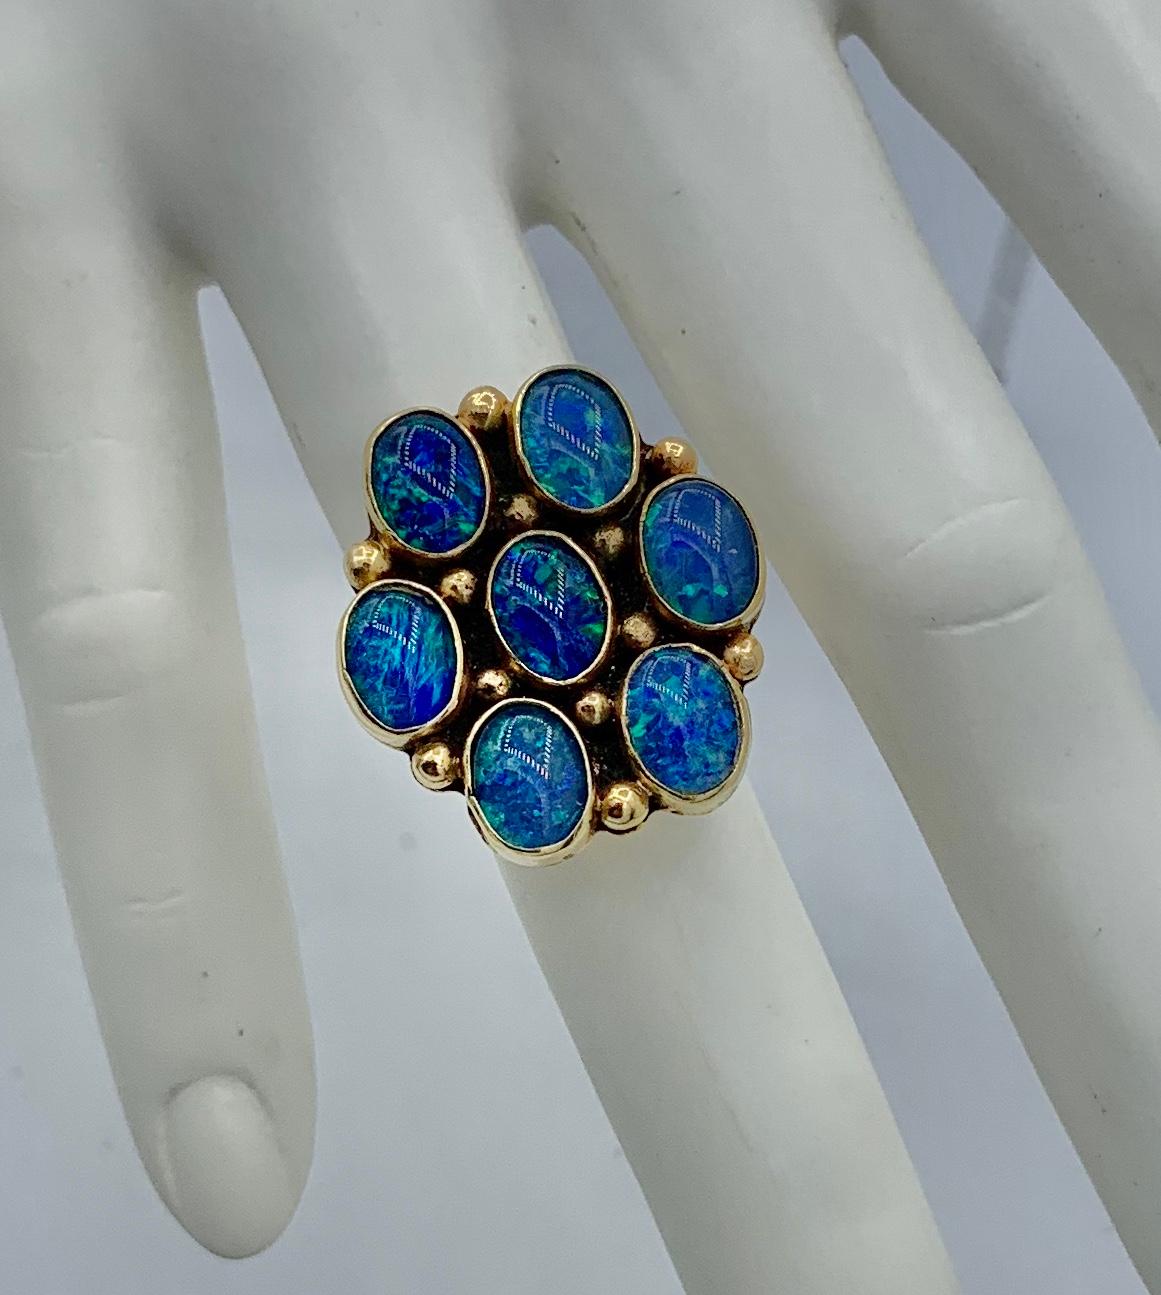 This is a stunning and very rare Black Opal ring in 14 Karat Yellow Gold by the Navajo artist Larry Sandoval and signed with his LS signature.  The large dramatic Native American ring has magnificent oval Black Opals.  The seven opals are in a